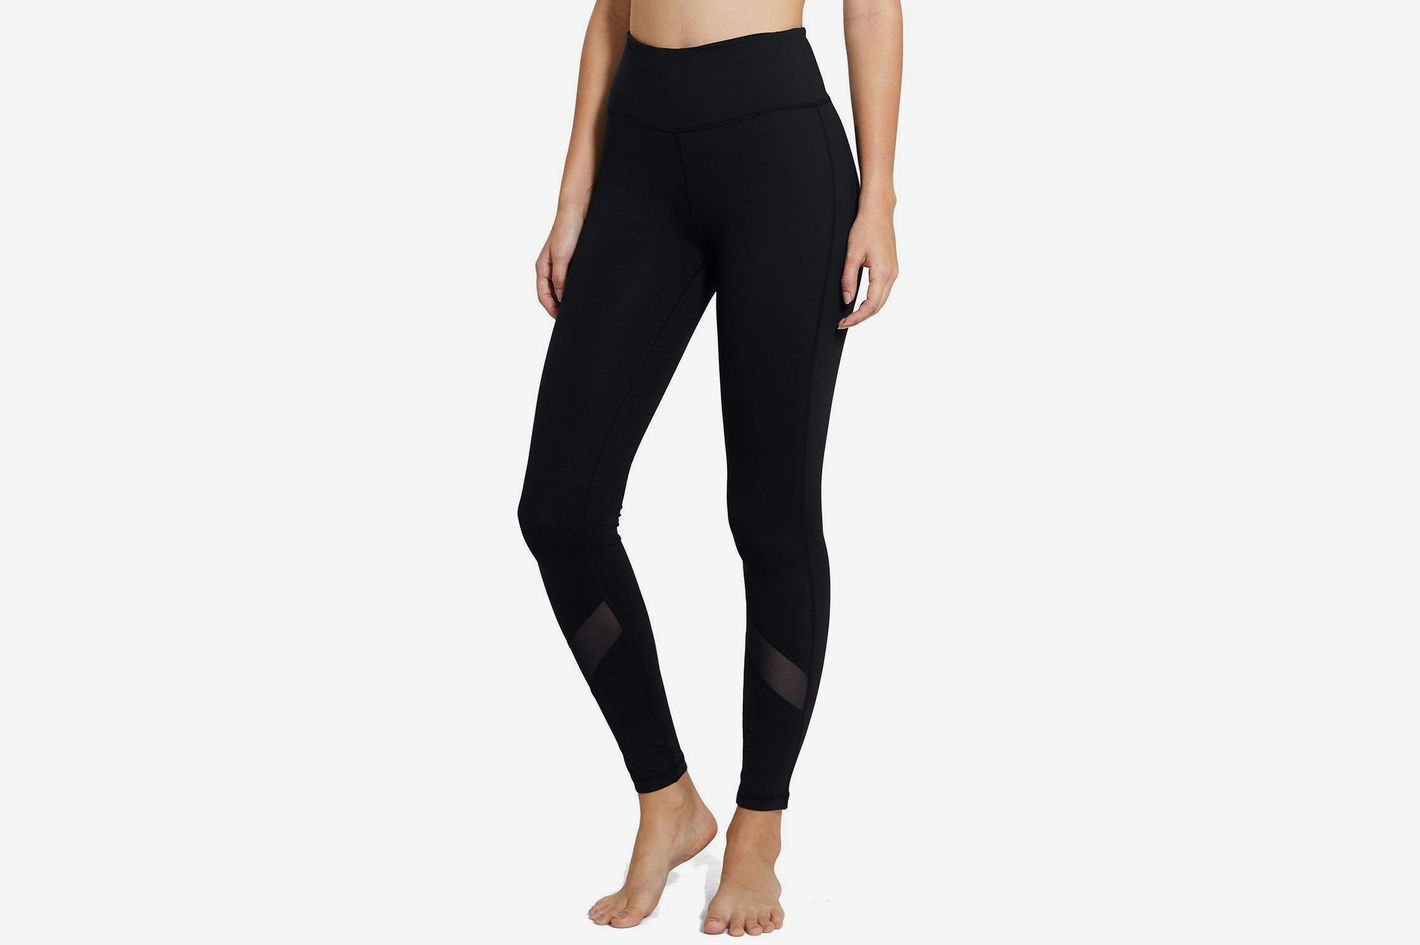 The 20 Best Yoga Pants for Women 2019